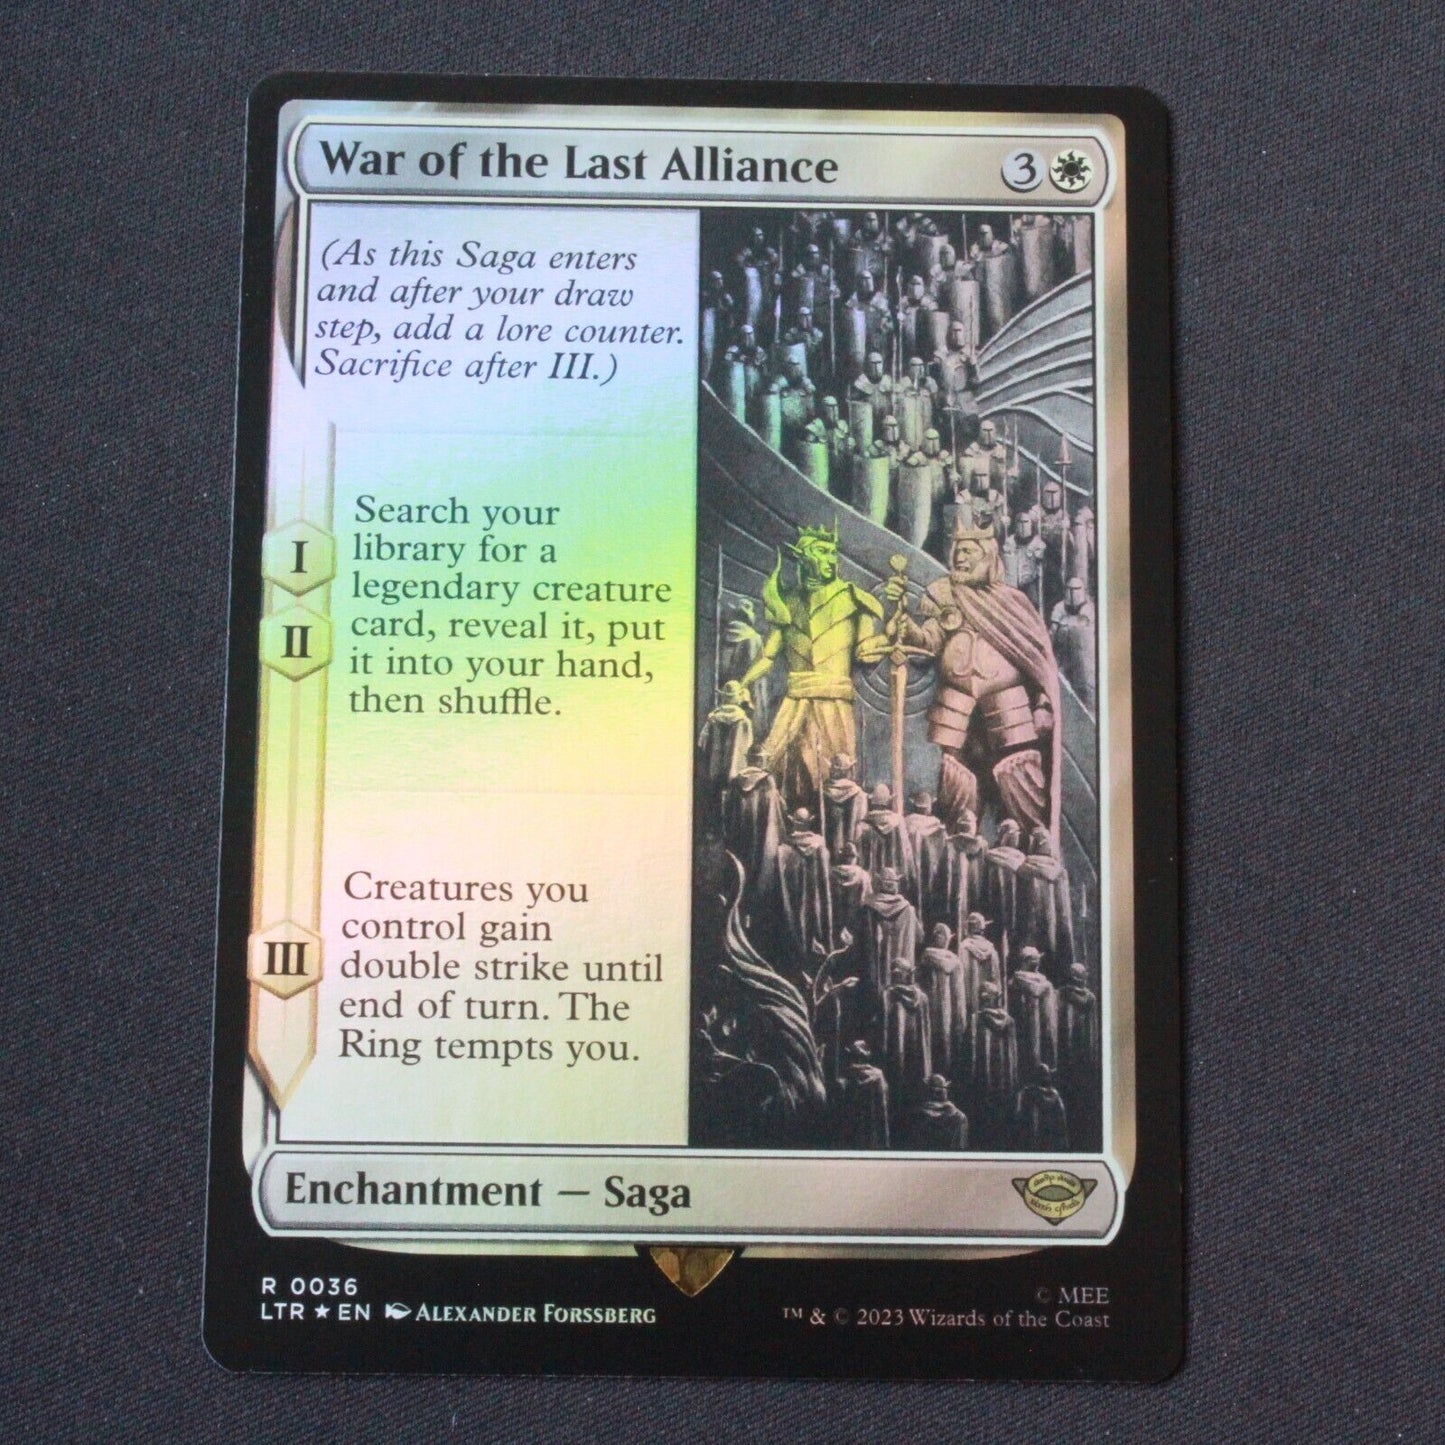 MTG The Lord of the Rings (LTR) Rare FOIL War of the Last Alliance 36 NM